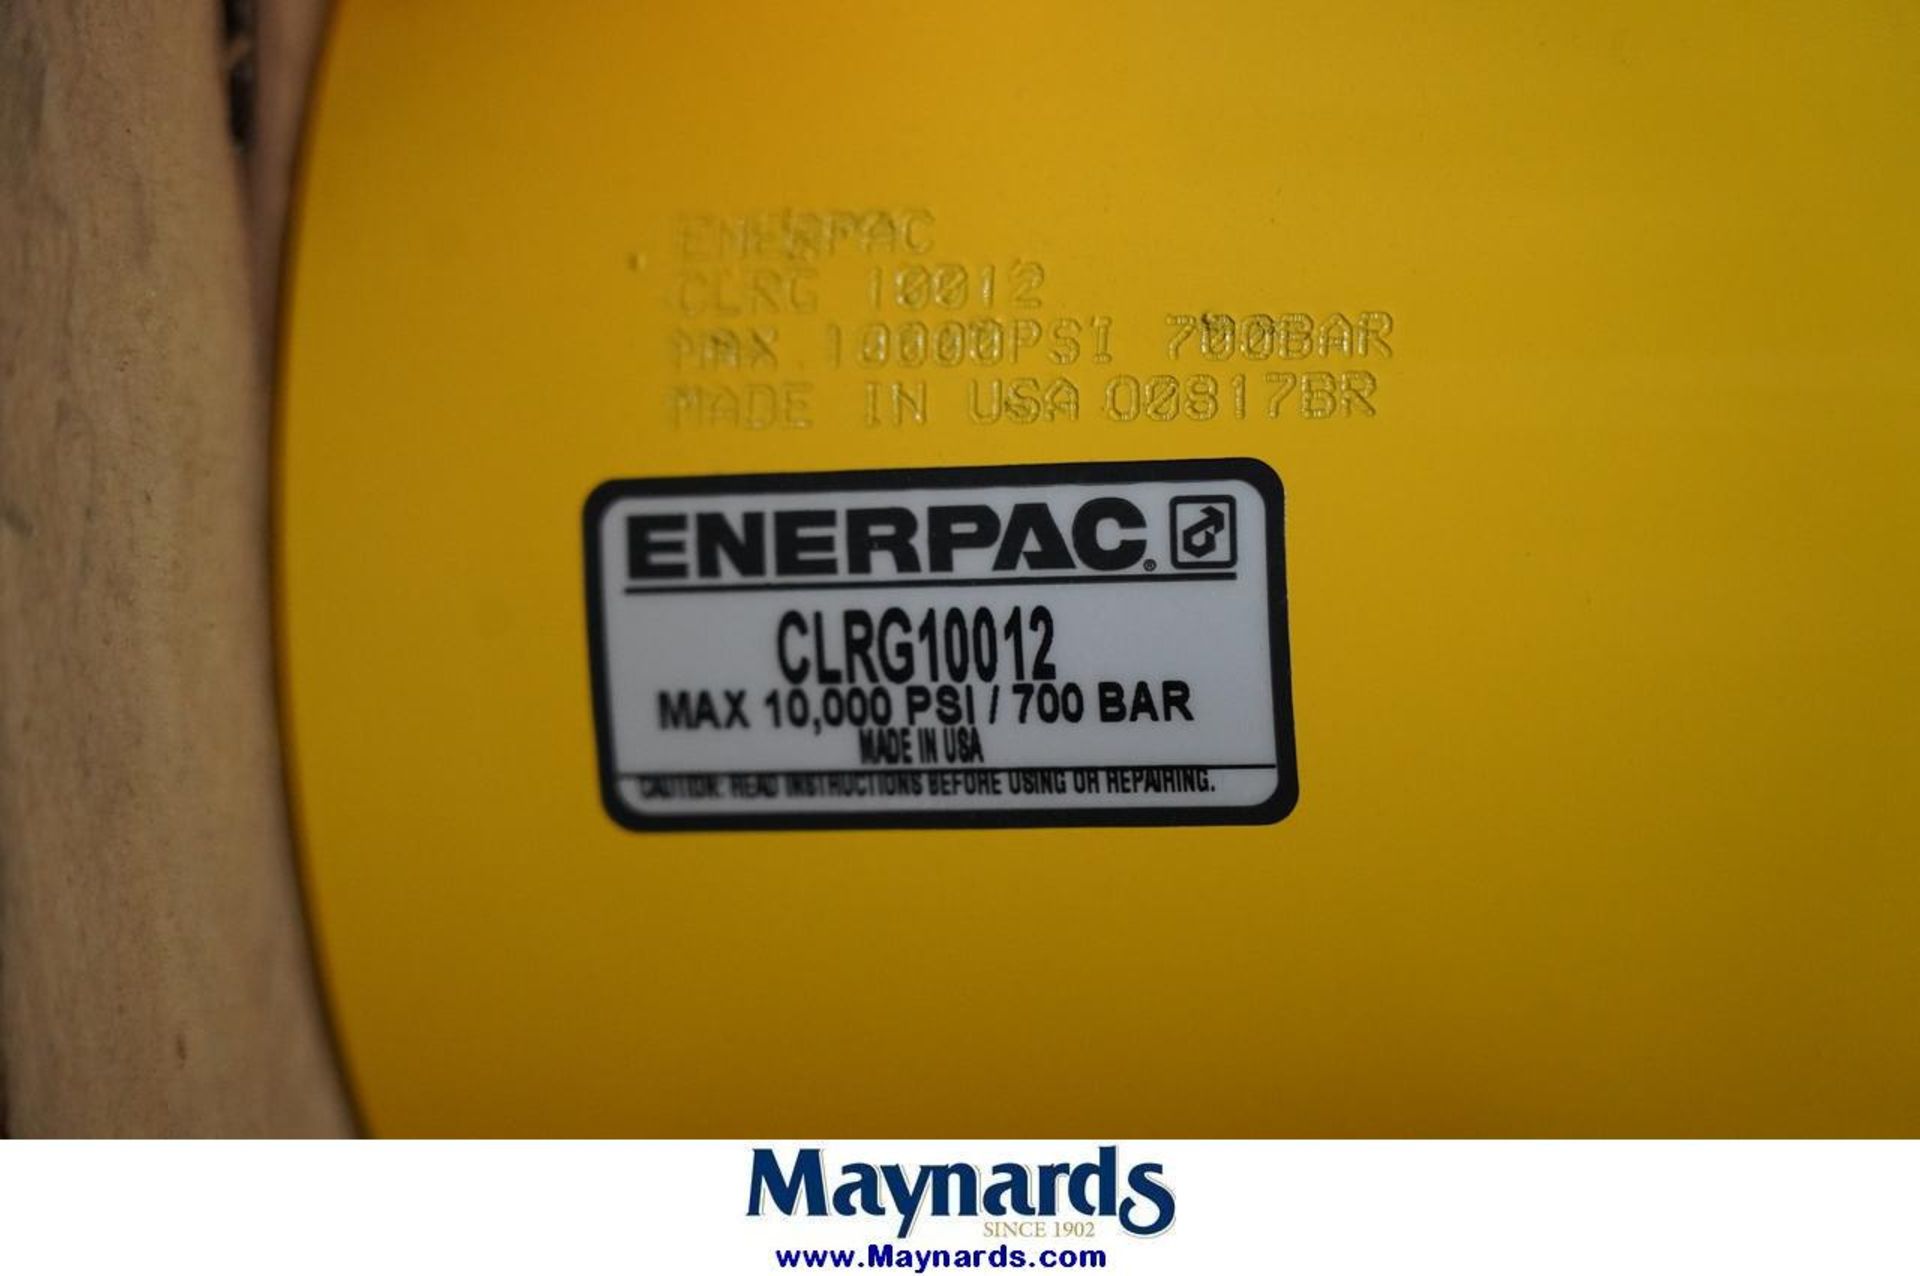 Enerpac CLRG10012 100 Ton Hydraulic Cylinder - Double Acting - High Tonnage - Image 3 of 4